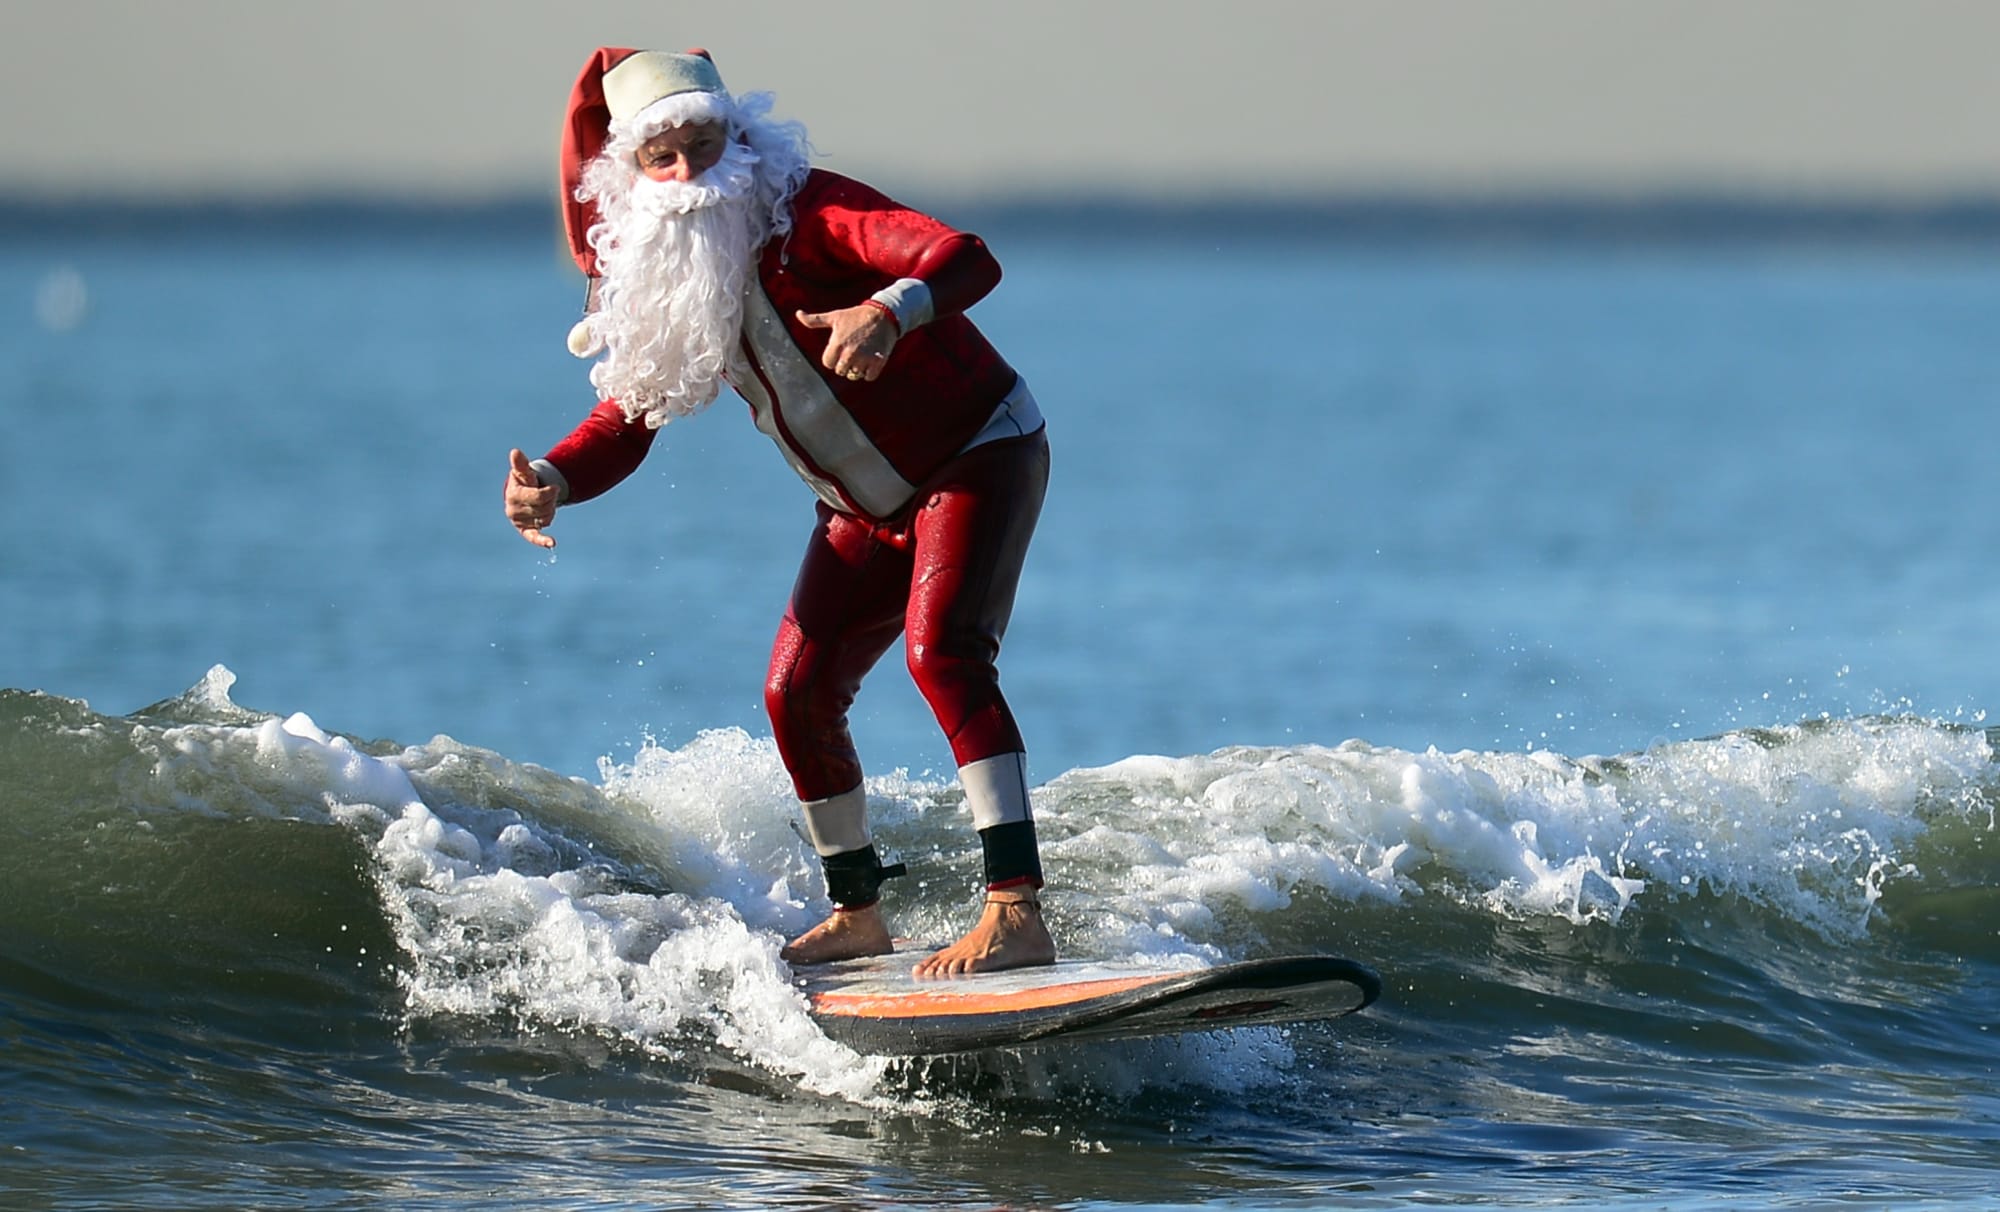 Https   Localpov.com Wp Content Uploads Getty Images 2016 12 158623114 Us Holiday Surfing Santa 